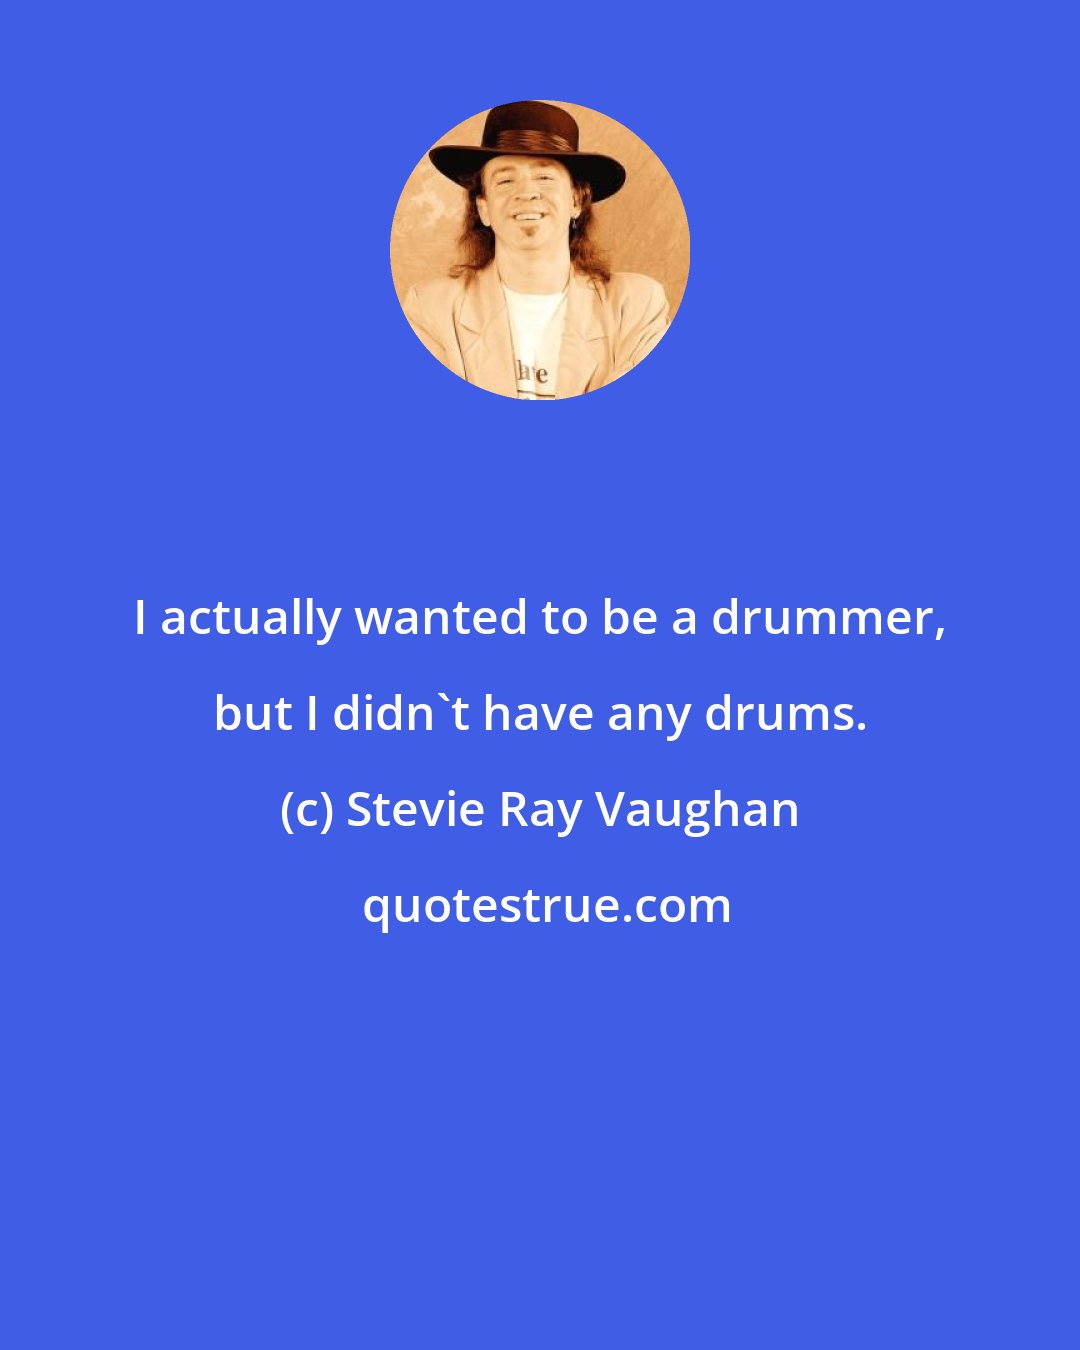 Stevie Ray Vaughan: I actually wanted to be a drummer, but I didn't have any drums.